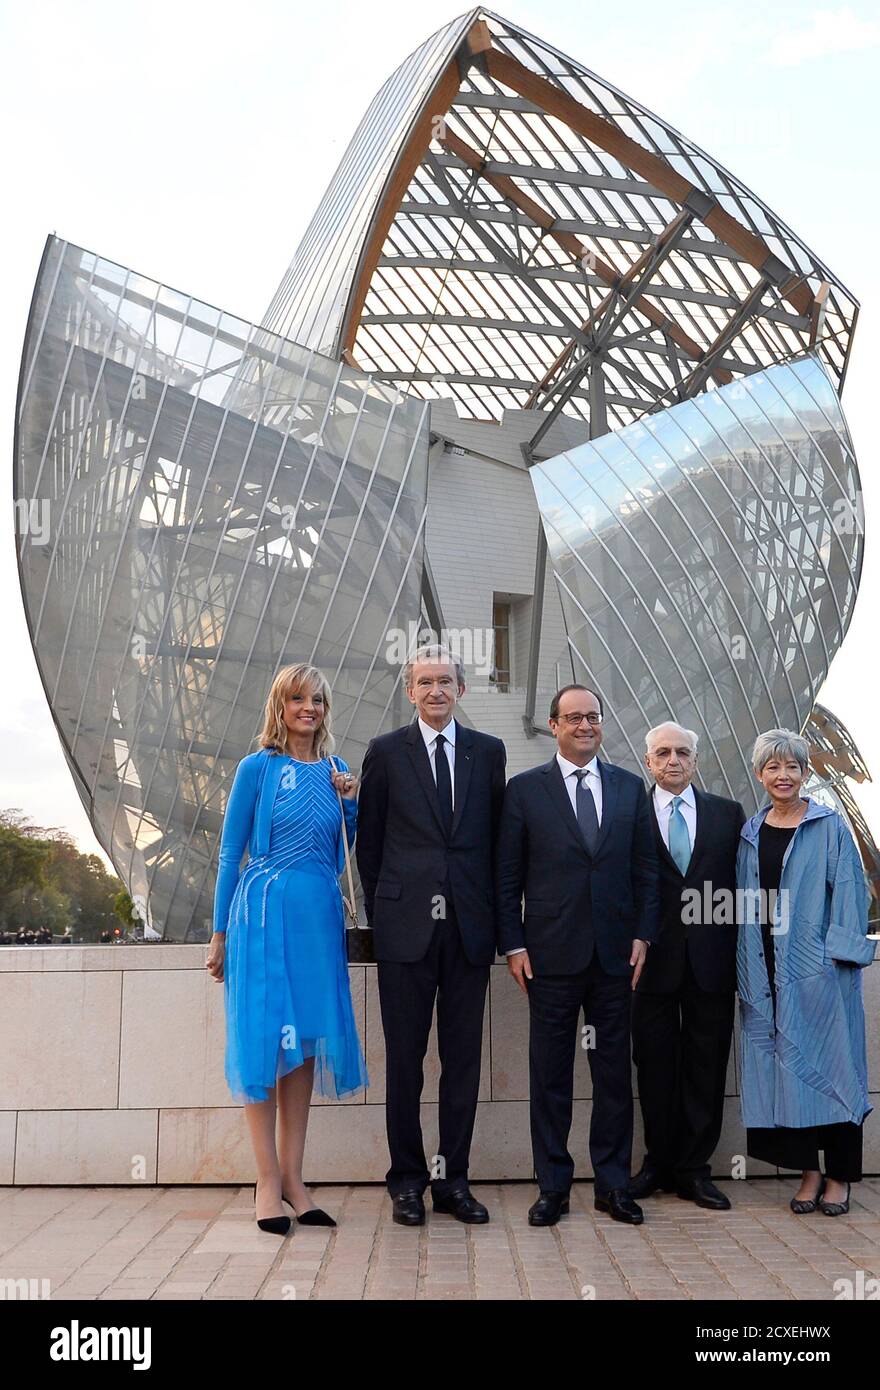 From L-R, pianist Helene Arnault, wife of LVMH luxury group Chief Executive Bernard  Arnault, French President Francois Hollande, U.S. architect Frank Gehry and  his wife Berta Isabel Aguilera pose outside the Fondation